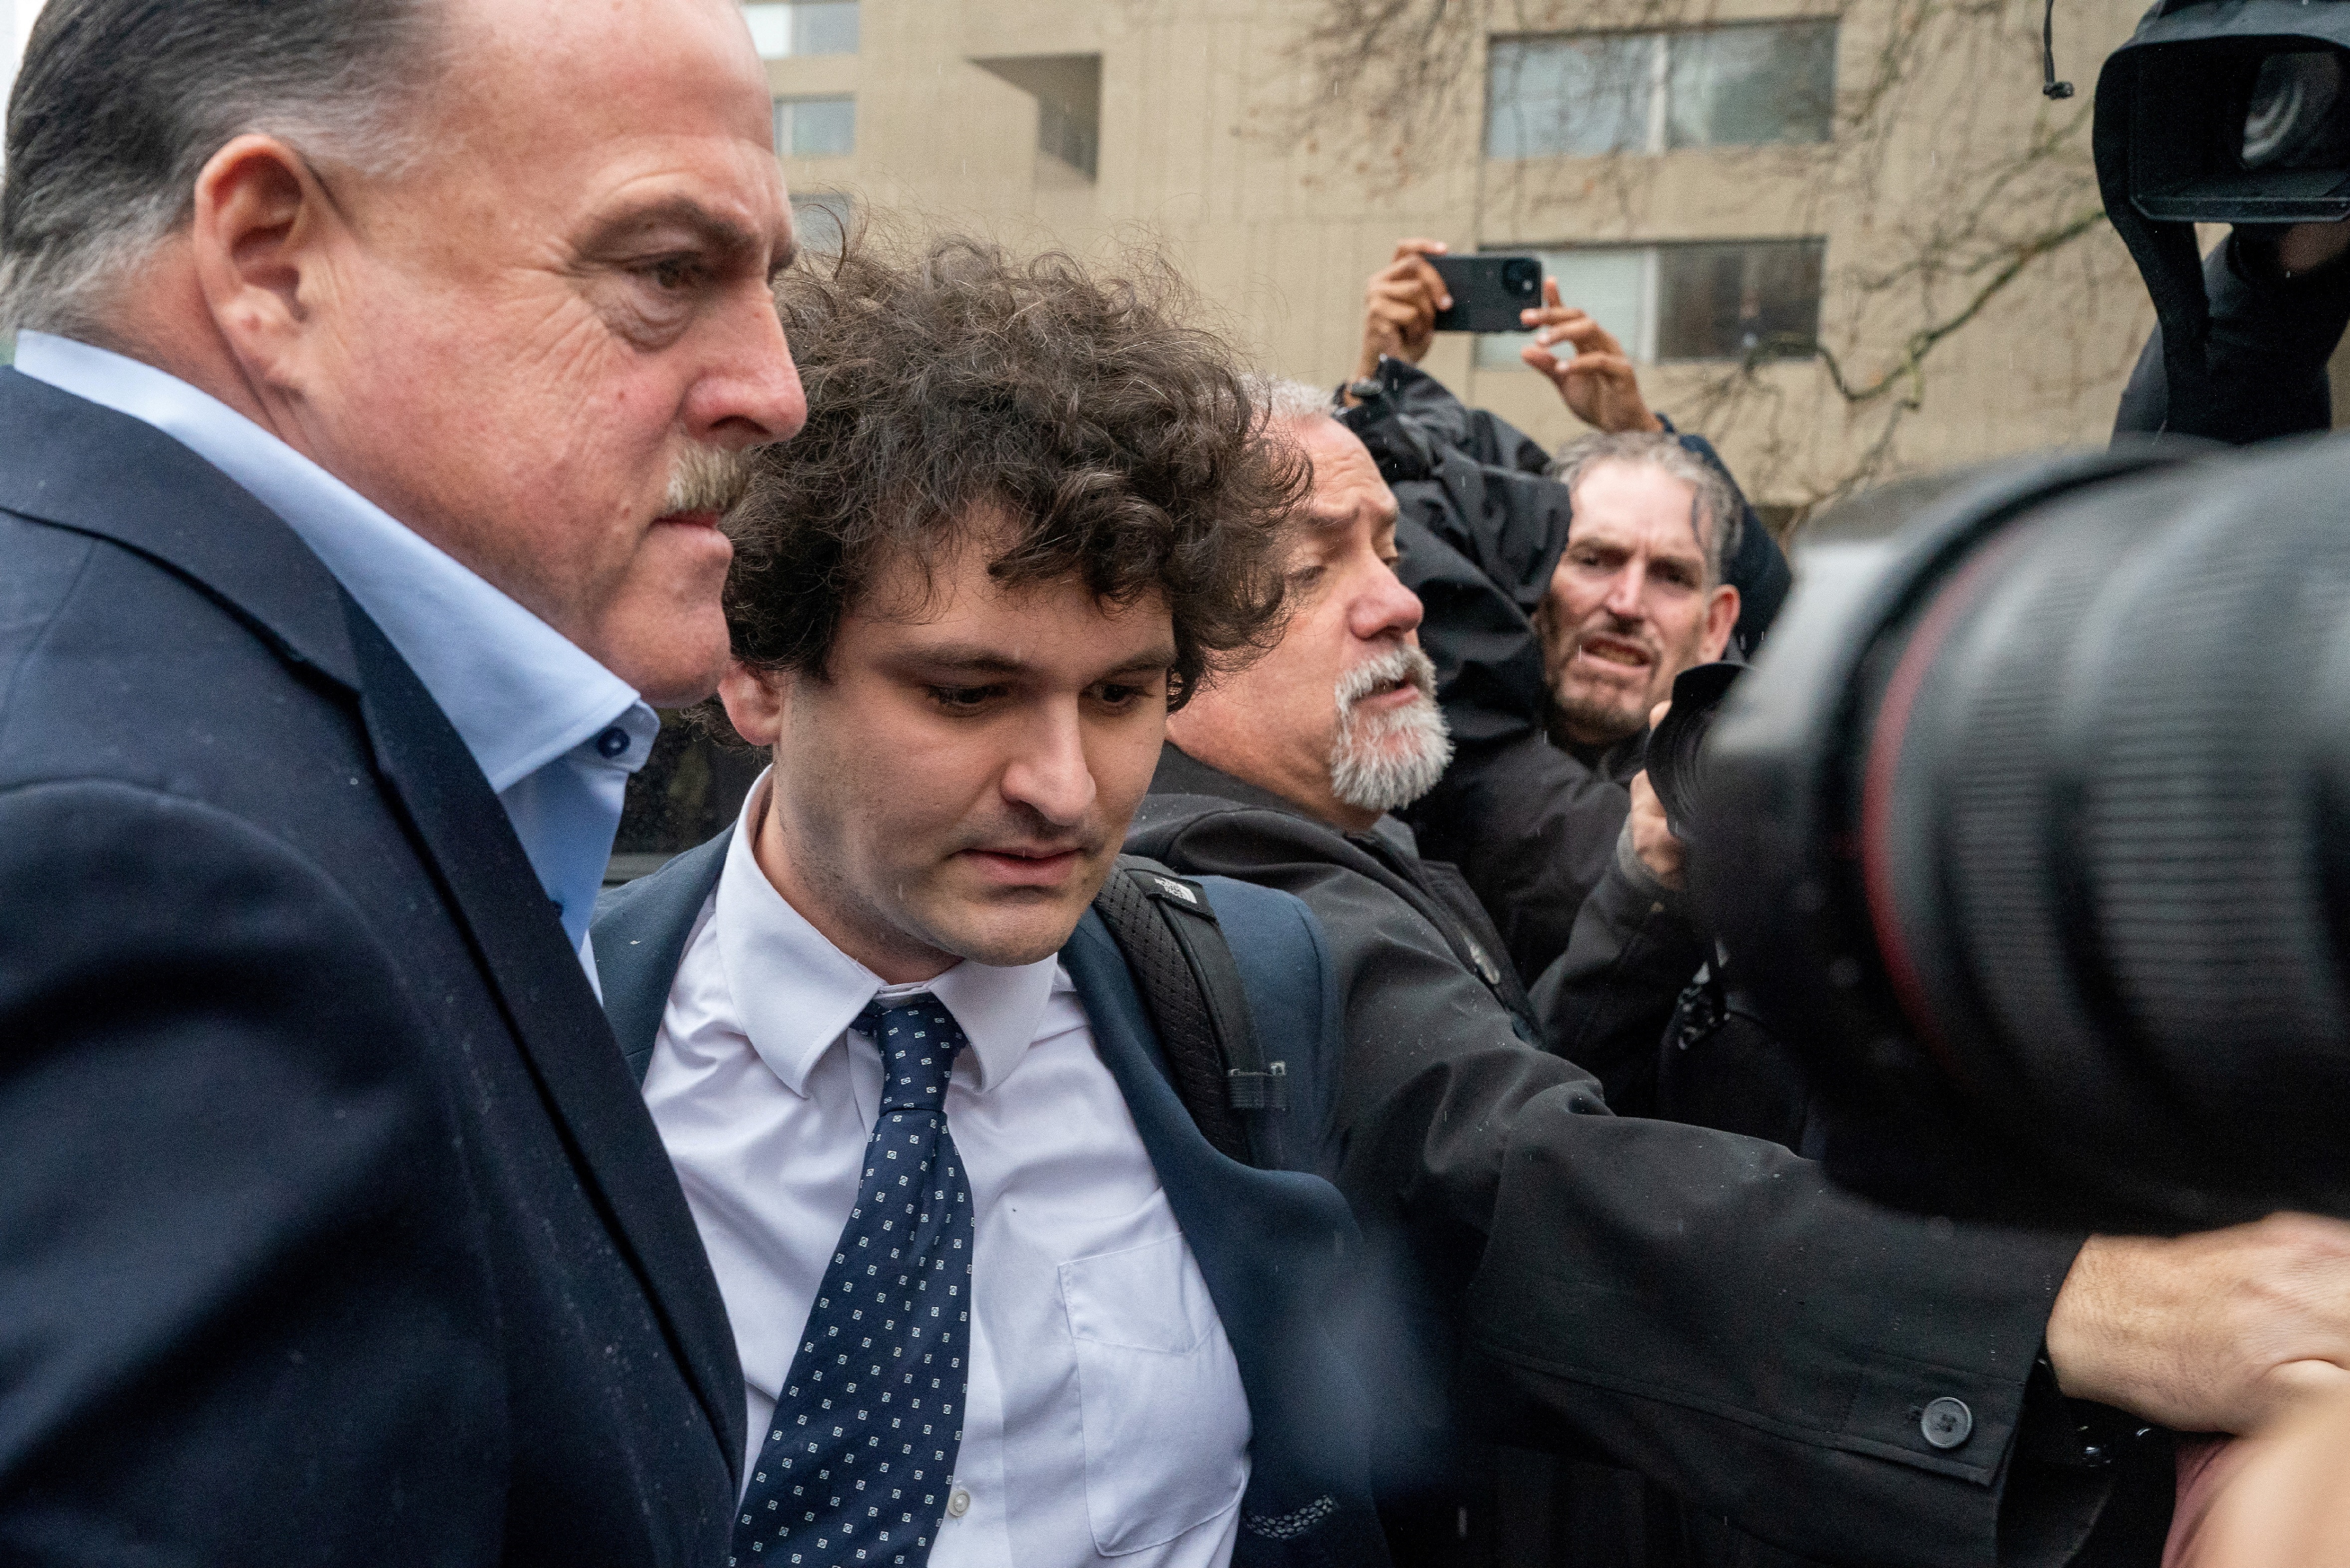 Former FTX Chief Executive Sam Bankman-Fried, who faces fraud charges over the collapse of the bankrupt cryptocurrency exchange, arrives on the day of a hearing at Manhattan federal court in New York City, the US on Jan 3, 2023. (Reuters)